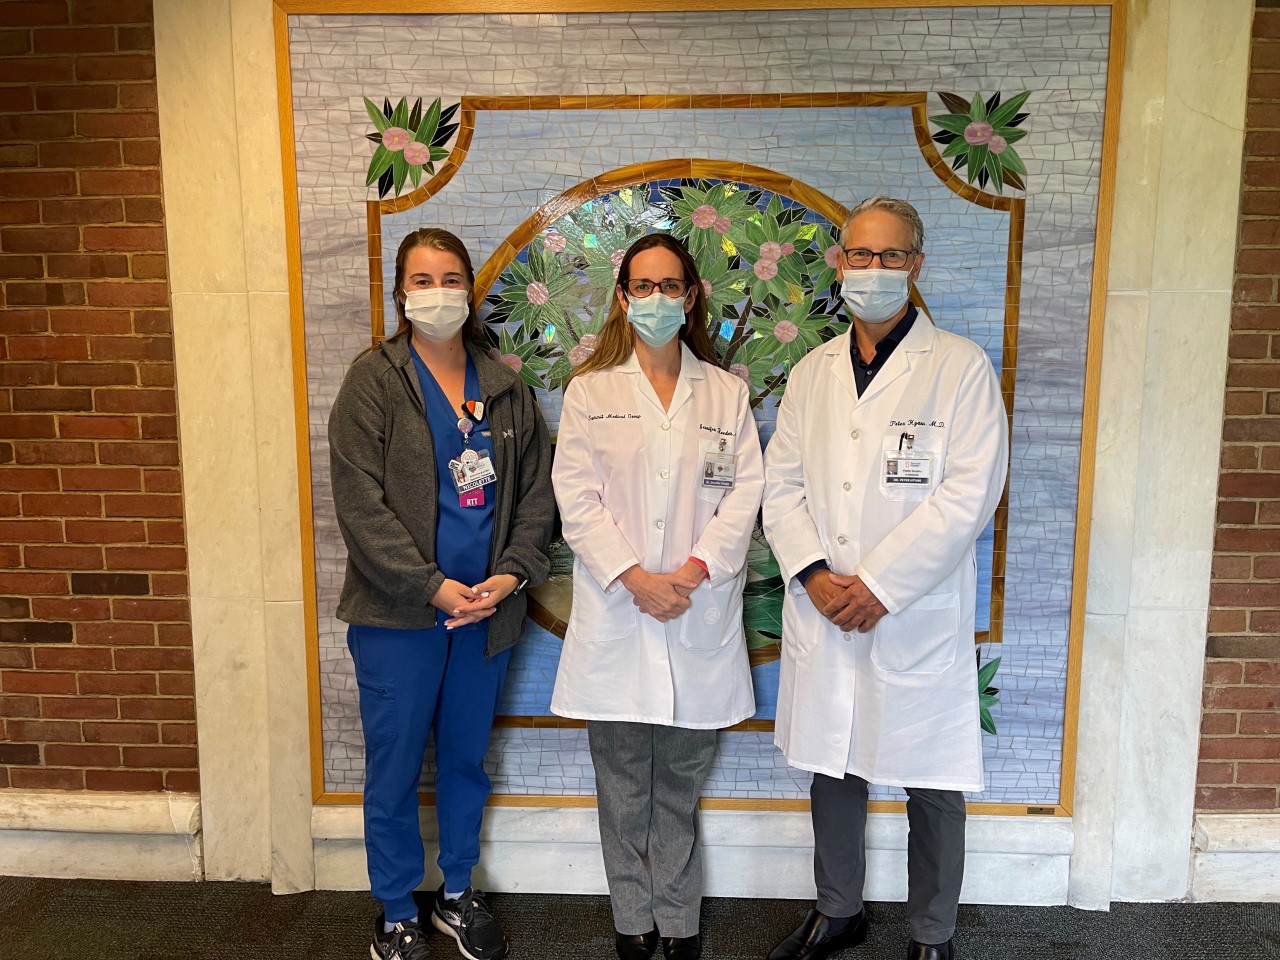 Group shot of Dr. Jennifer Reeder, radiation therapist Nicolette Slattery, and Dr. Peter Hyans in front of a colorful mosaic